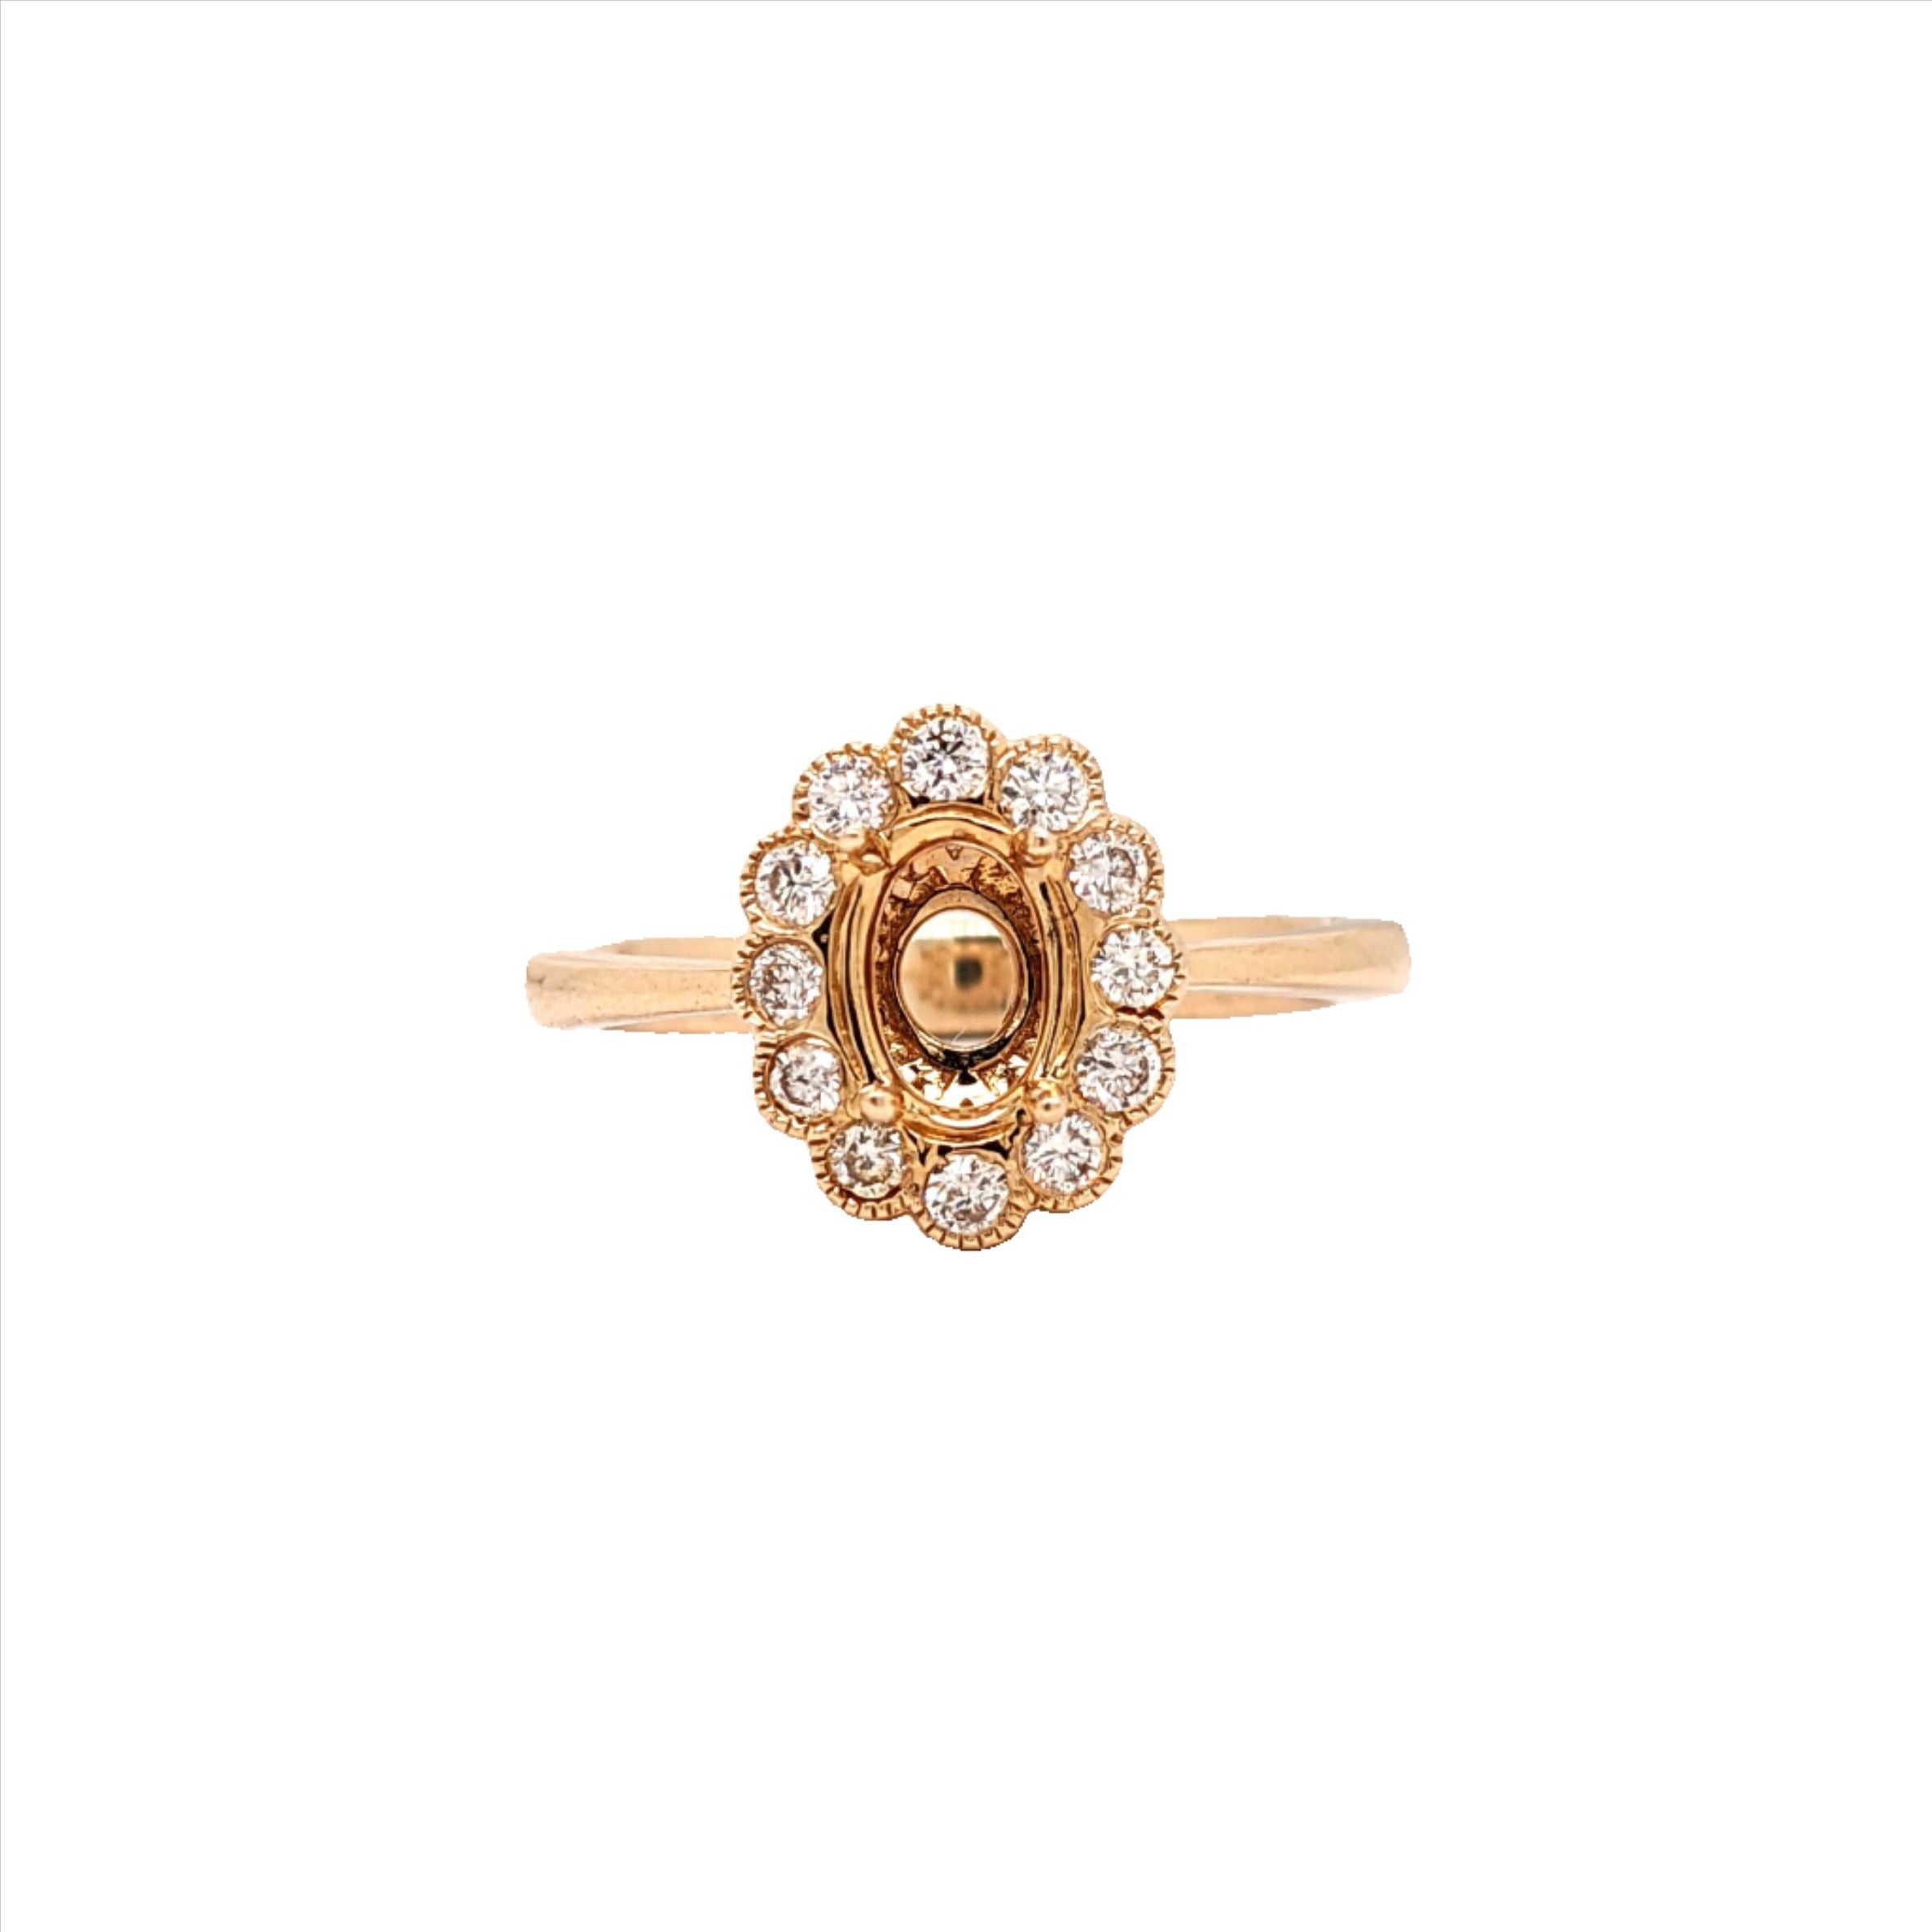 Oval Ring Semi Mount in Solid 14k White, Yellow or Rose Gold w Round Diamond Accents and Milgrain Details | Oval | Custom Sizes | Setting